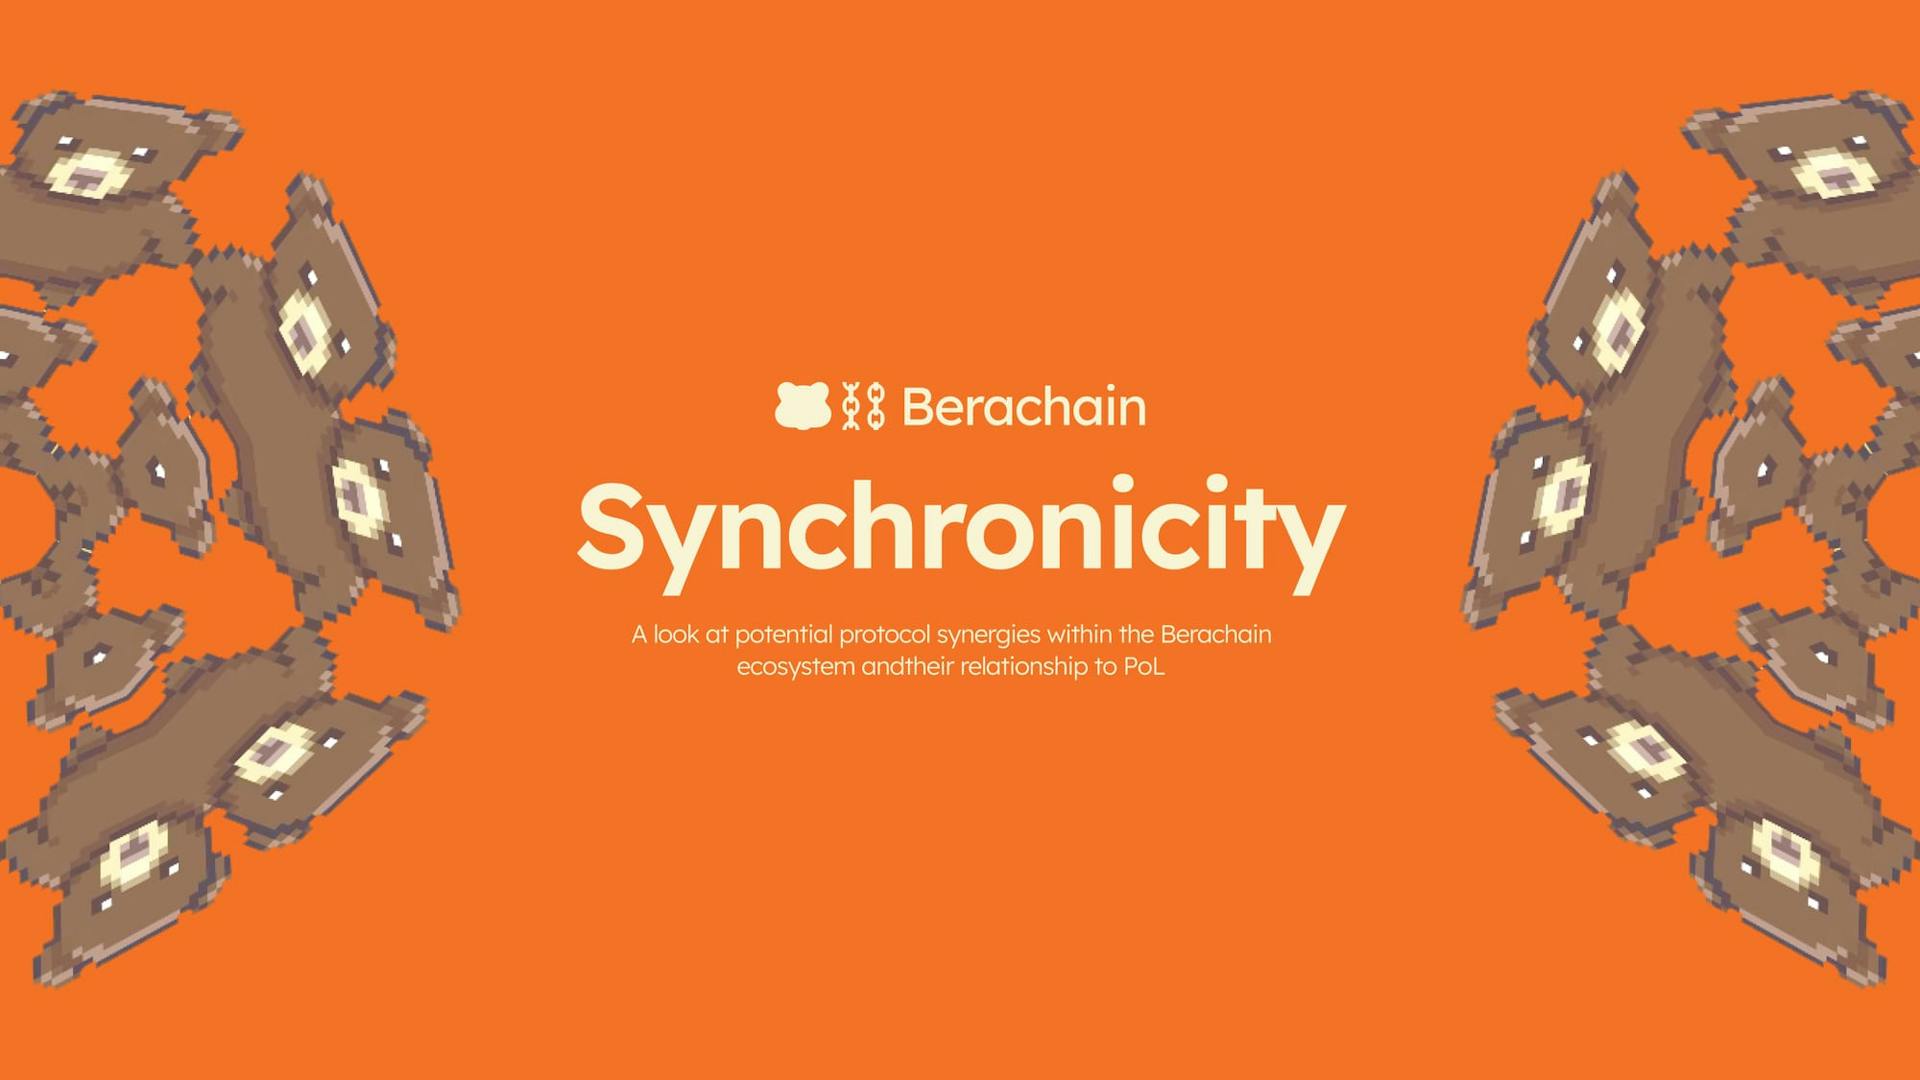 Synchronicity: A look at potential protocol synergies within the Berachain ecosystem and their relationship to PoL